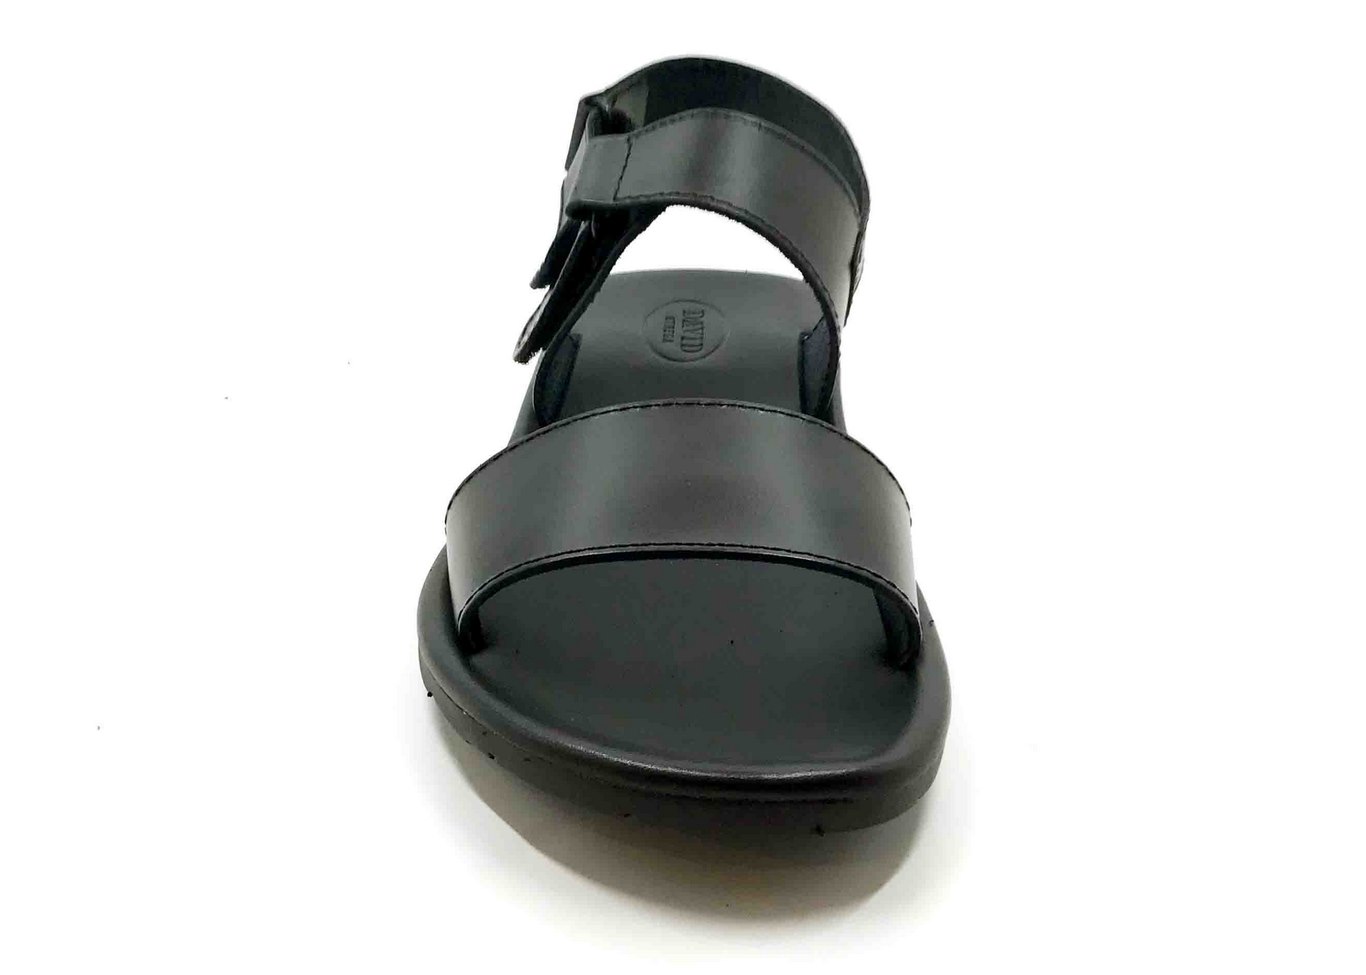 Padded sole Sandals in Black cowhide leather